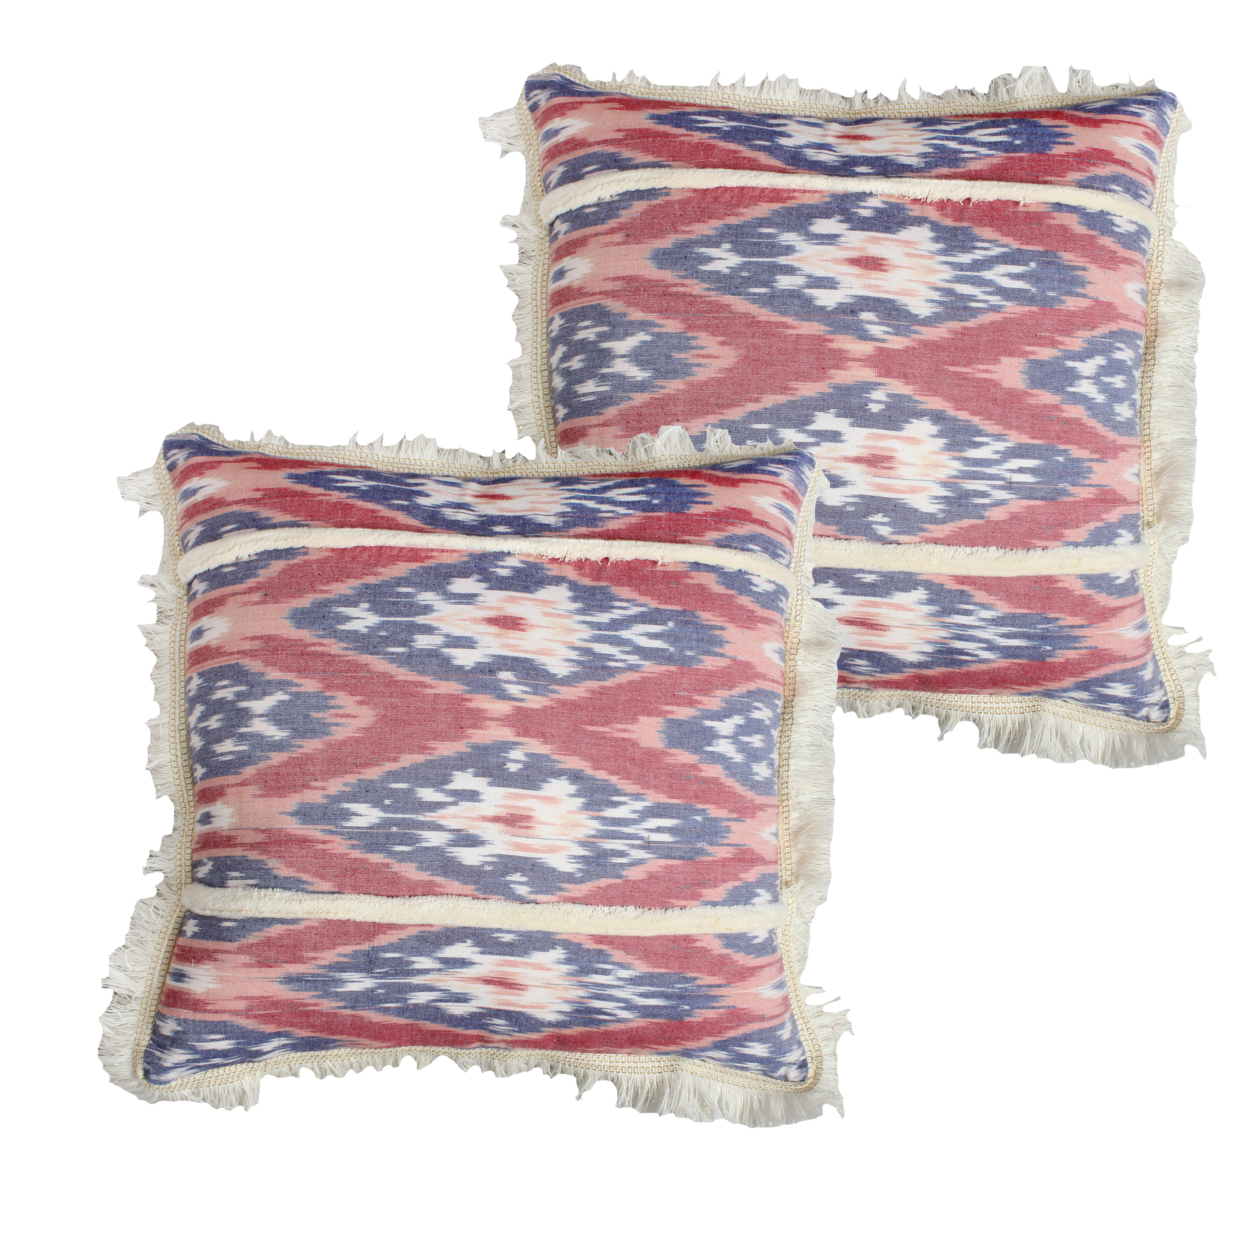 18 X 18 Handcrafted Square Cotton Accent Throw Pillow, Floral Ikat Dyed Pattern, Fringe Accent, Set Of 2, Multicolor